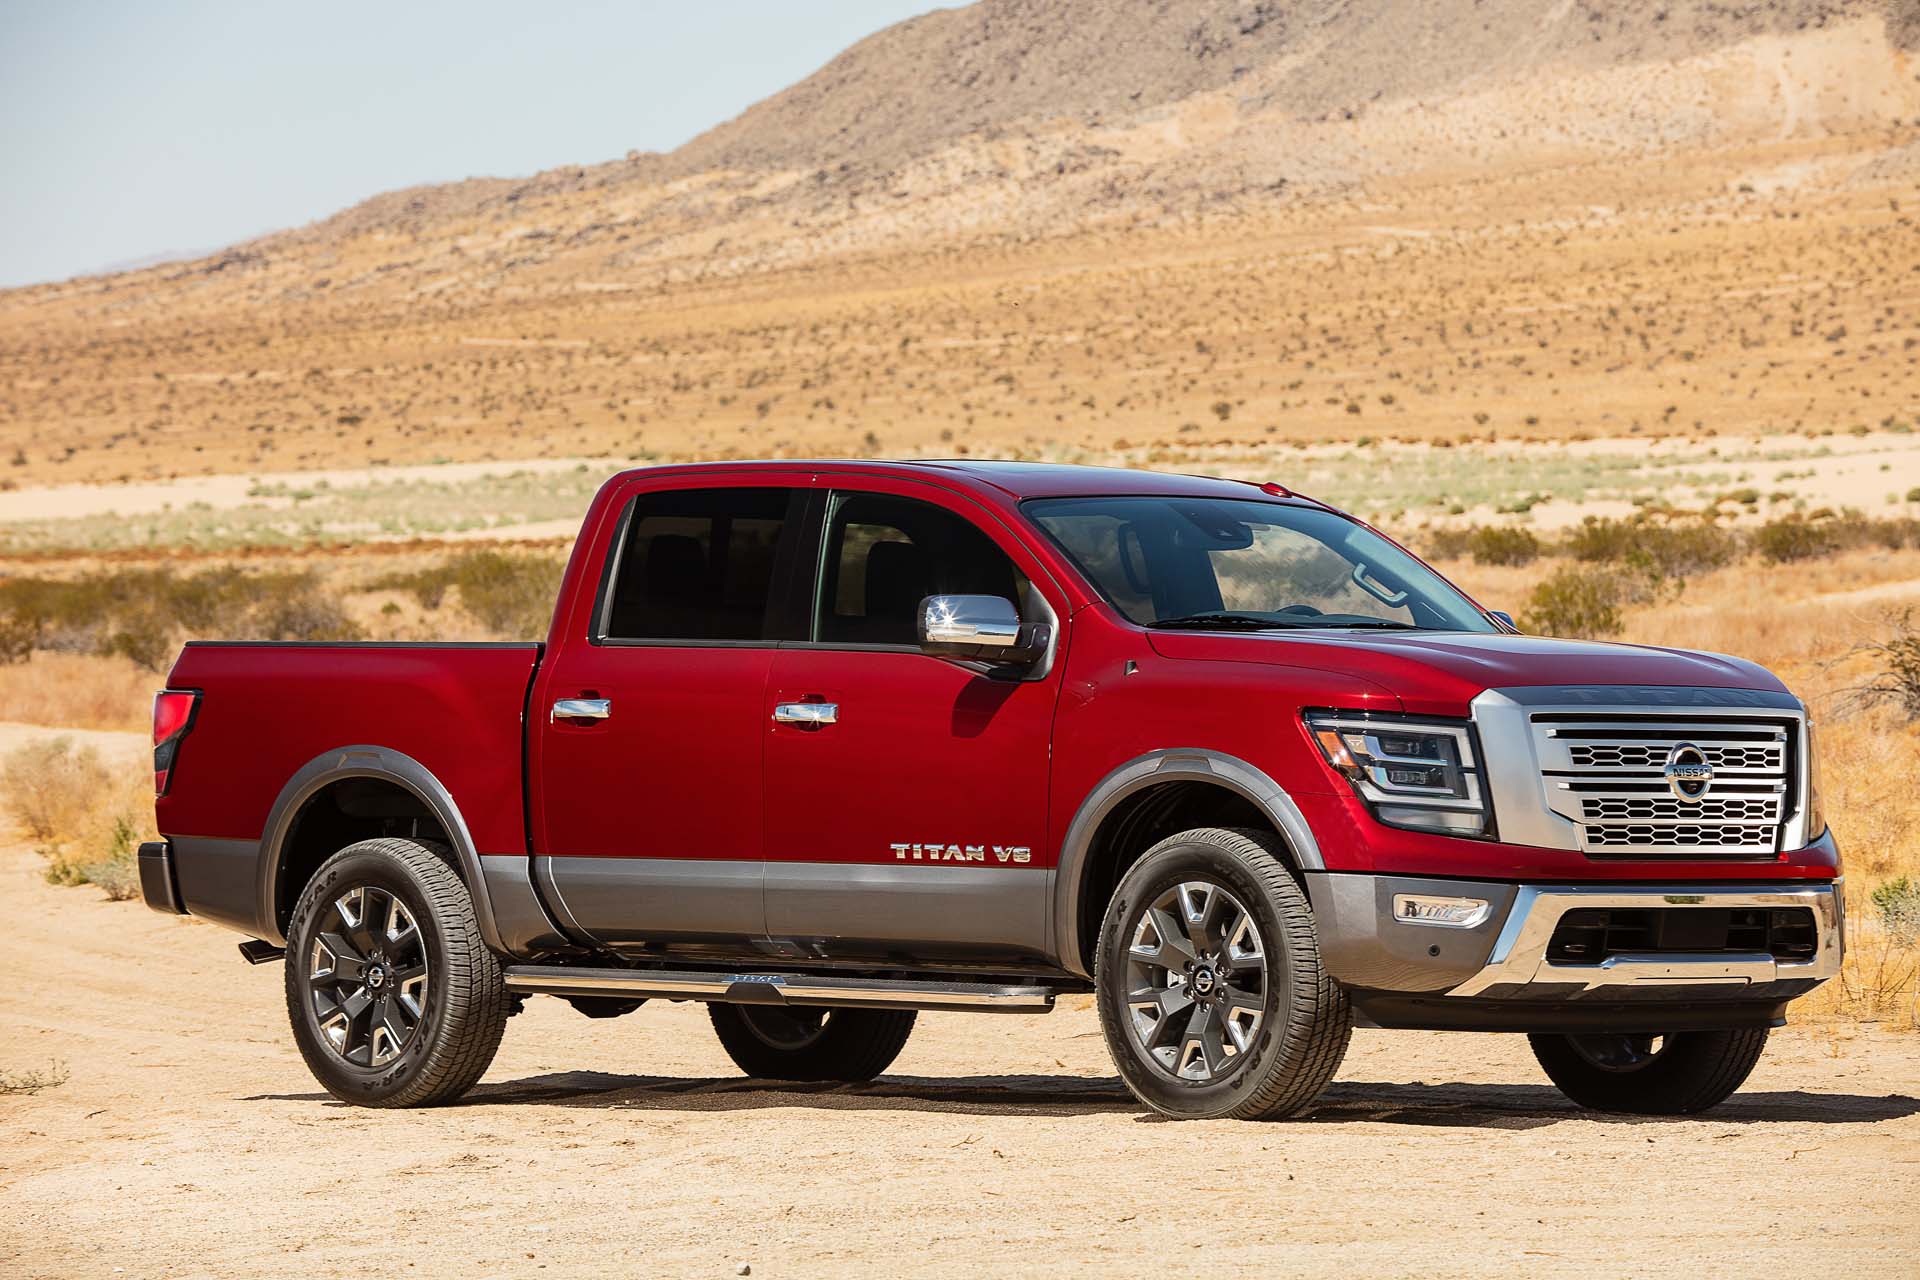 2020 Nissan Titan the look of the Warrior and a 9-speed transmission